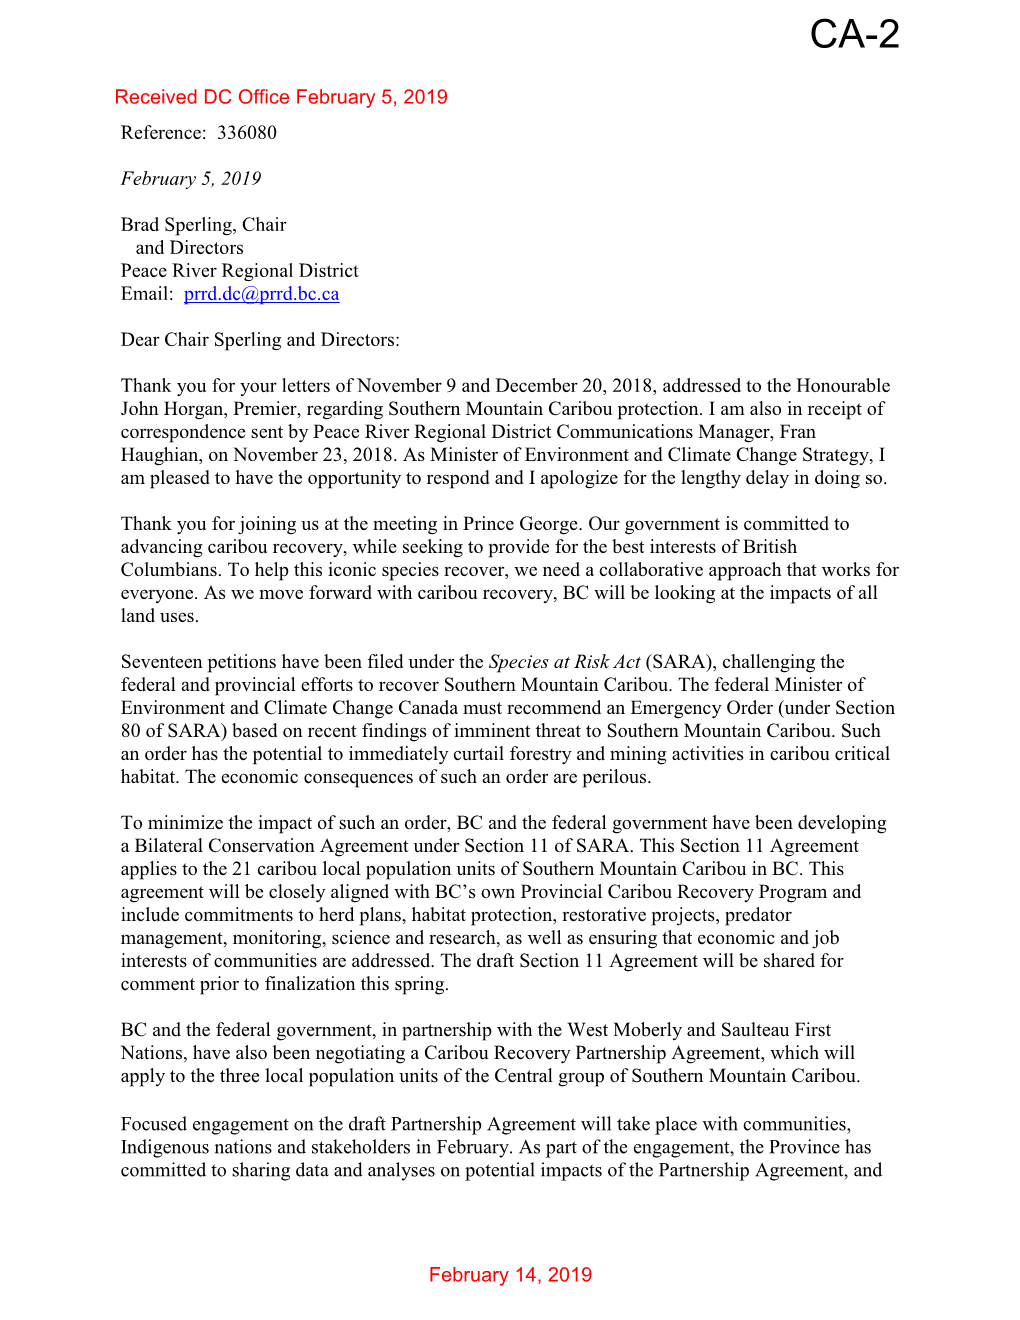 Reference: 336080 February 5, 2019 Brad Sperling, Chair and Directors Peace River Regional District Email: Prrd.Dc@Prrd.Bc.Ca